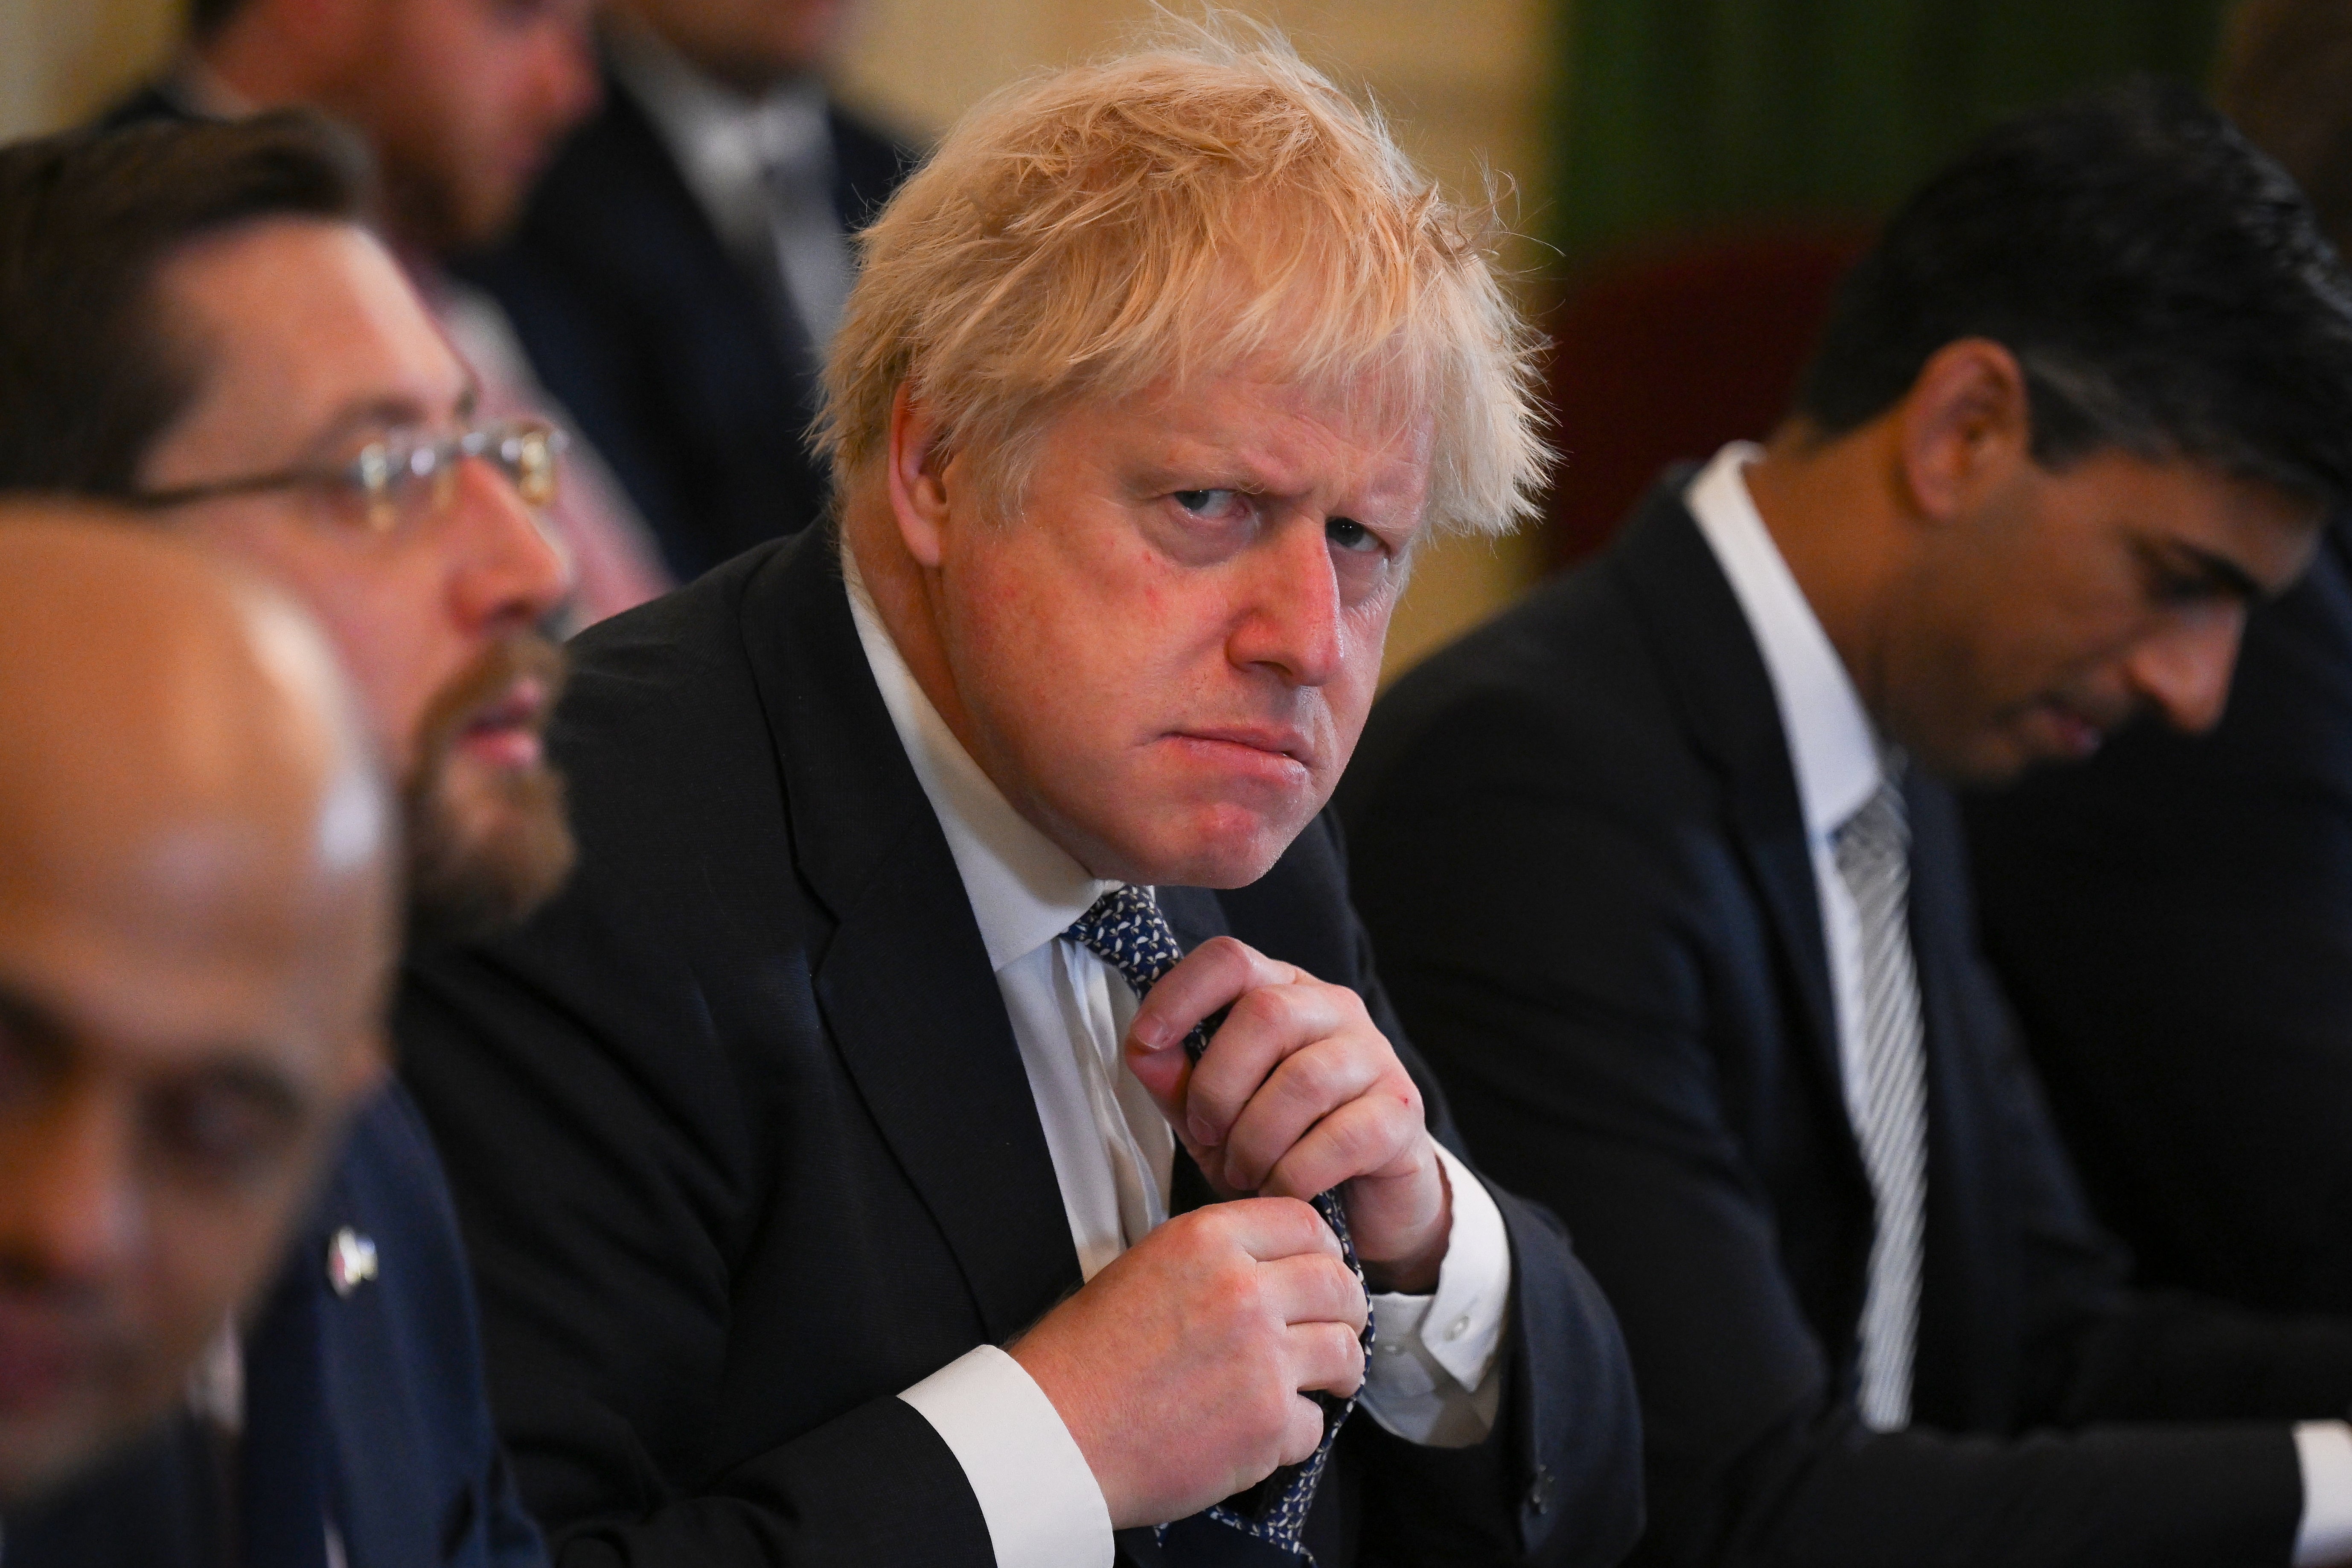 Prime Minister Boris Johnson adjusts his tie at the start of a Cabinet meeting on Tuesday (Daniel Leal/PA)